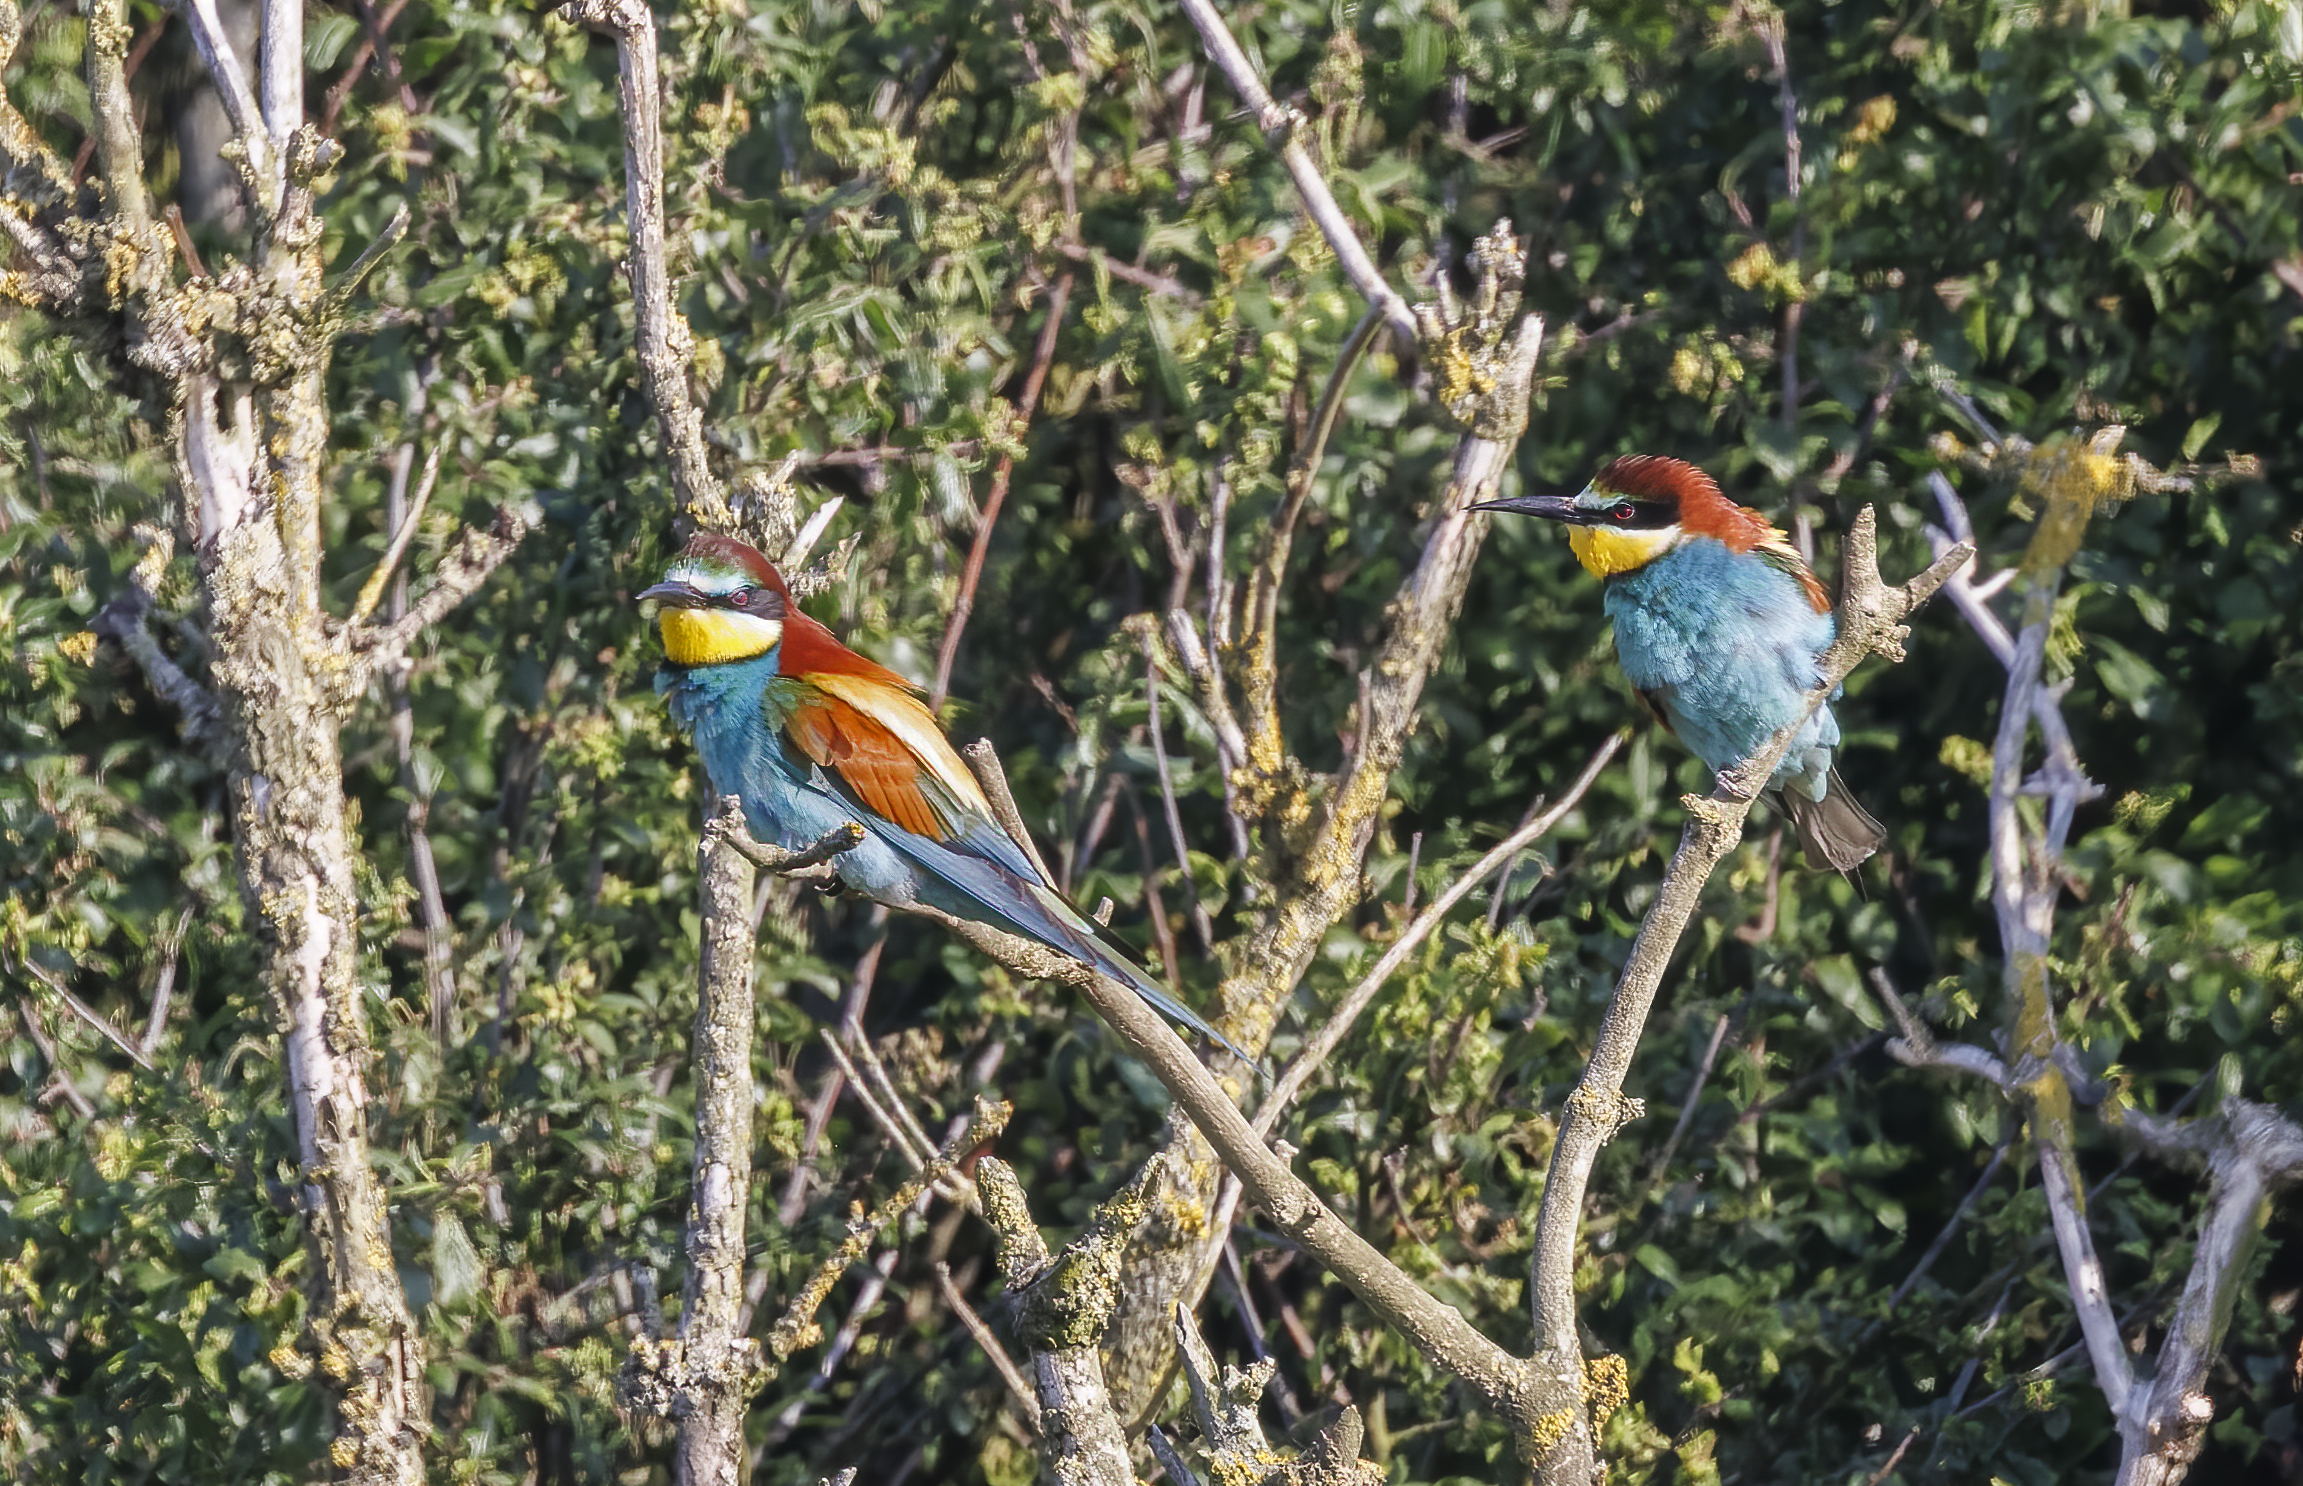 Two bee-eaters sit on branches among the trees